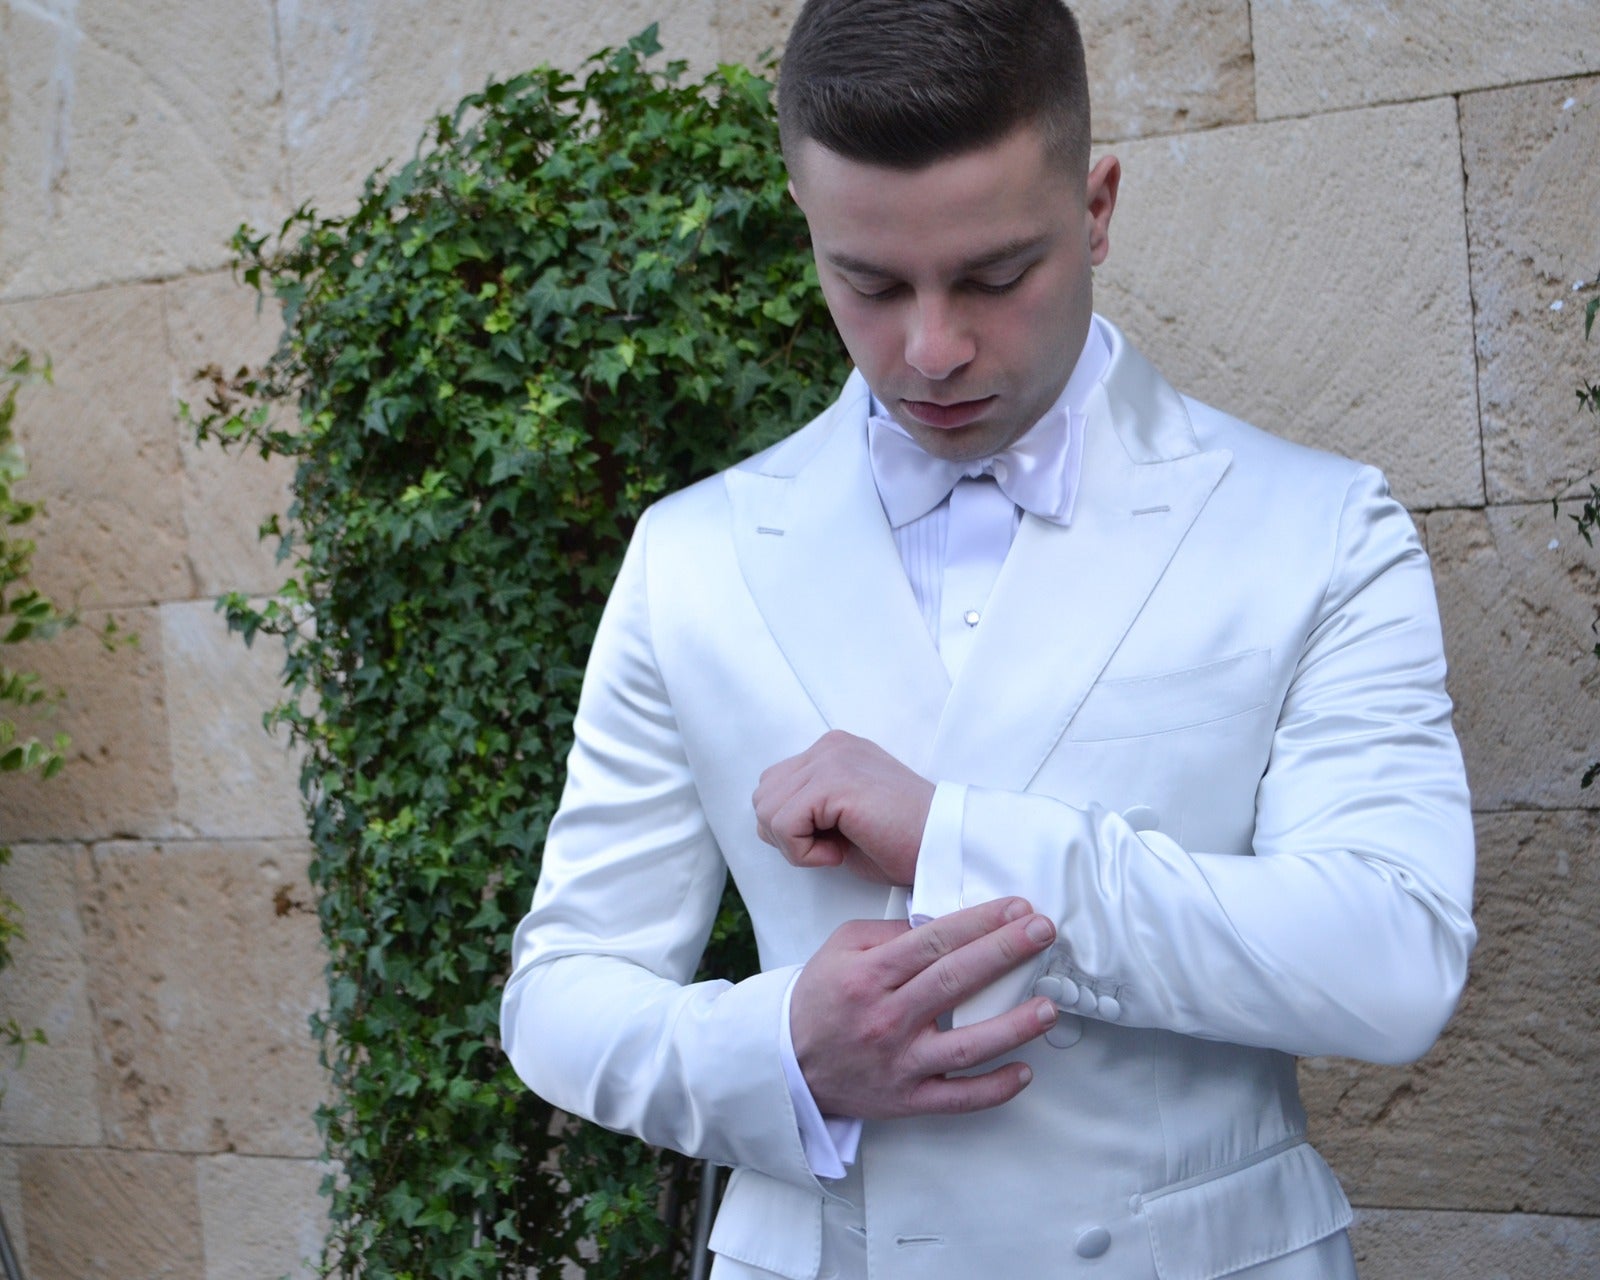 White-Tie Dress Code And Vf Menswear Will Help To Prepare You